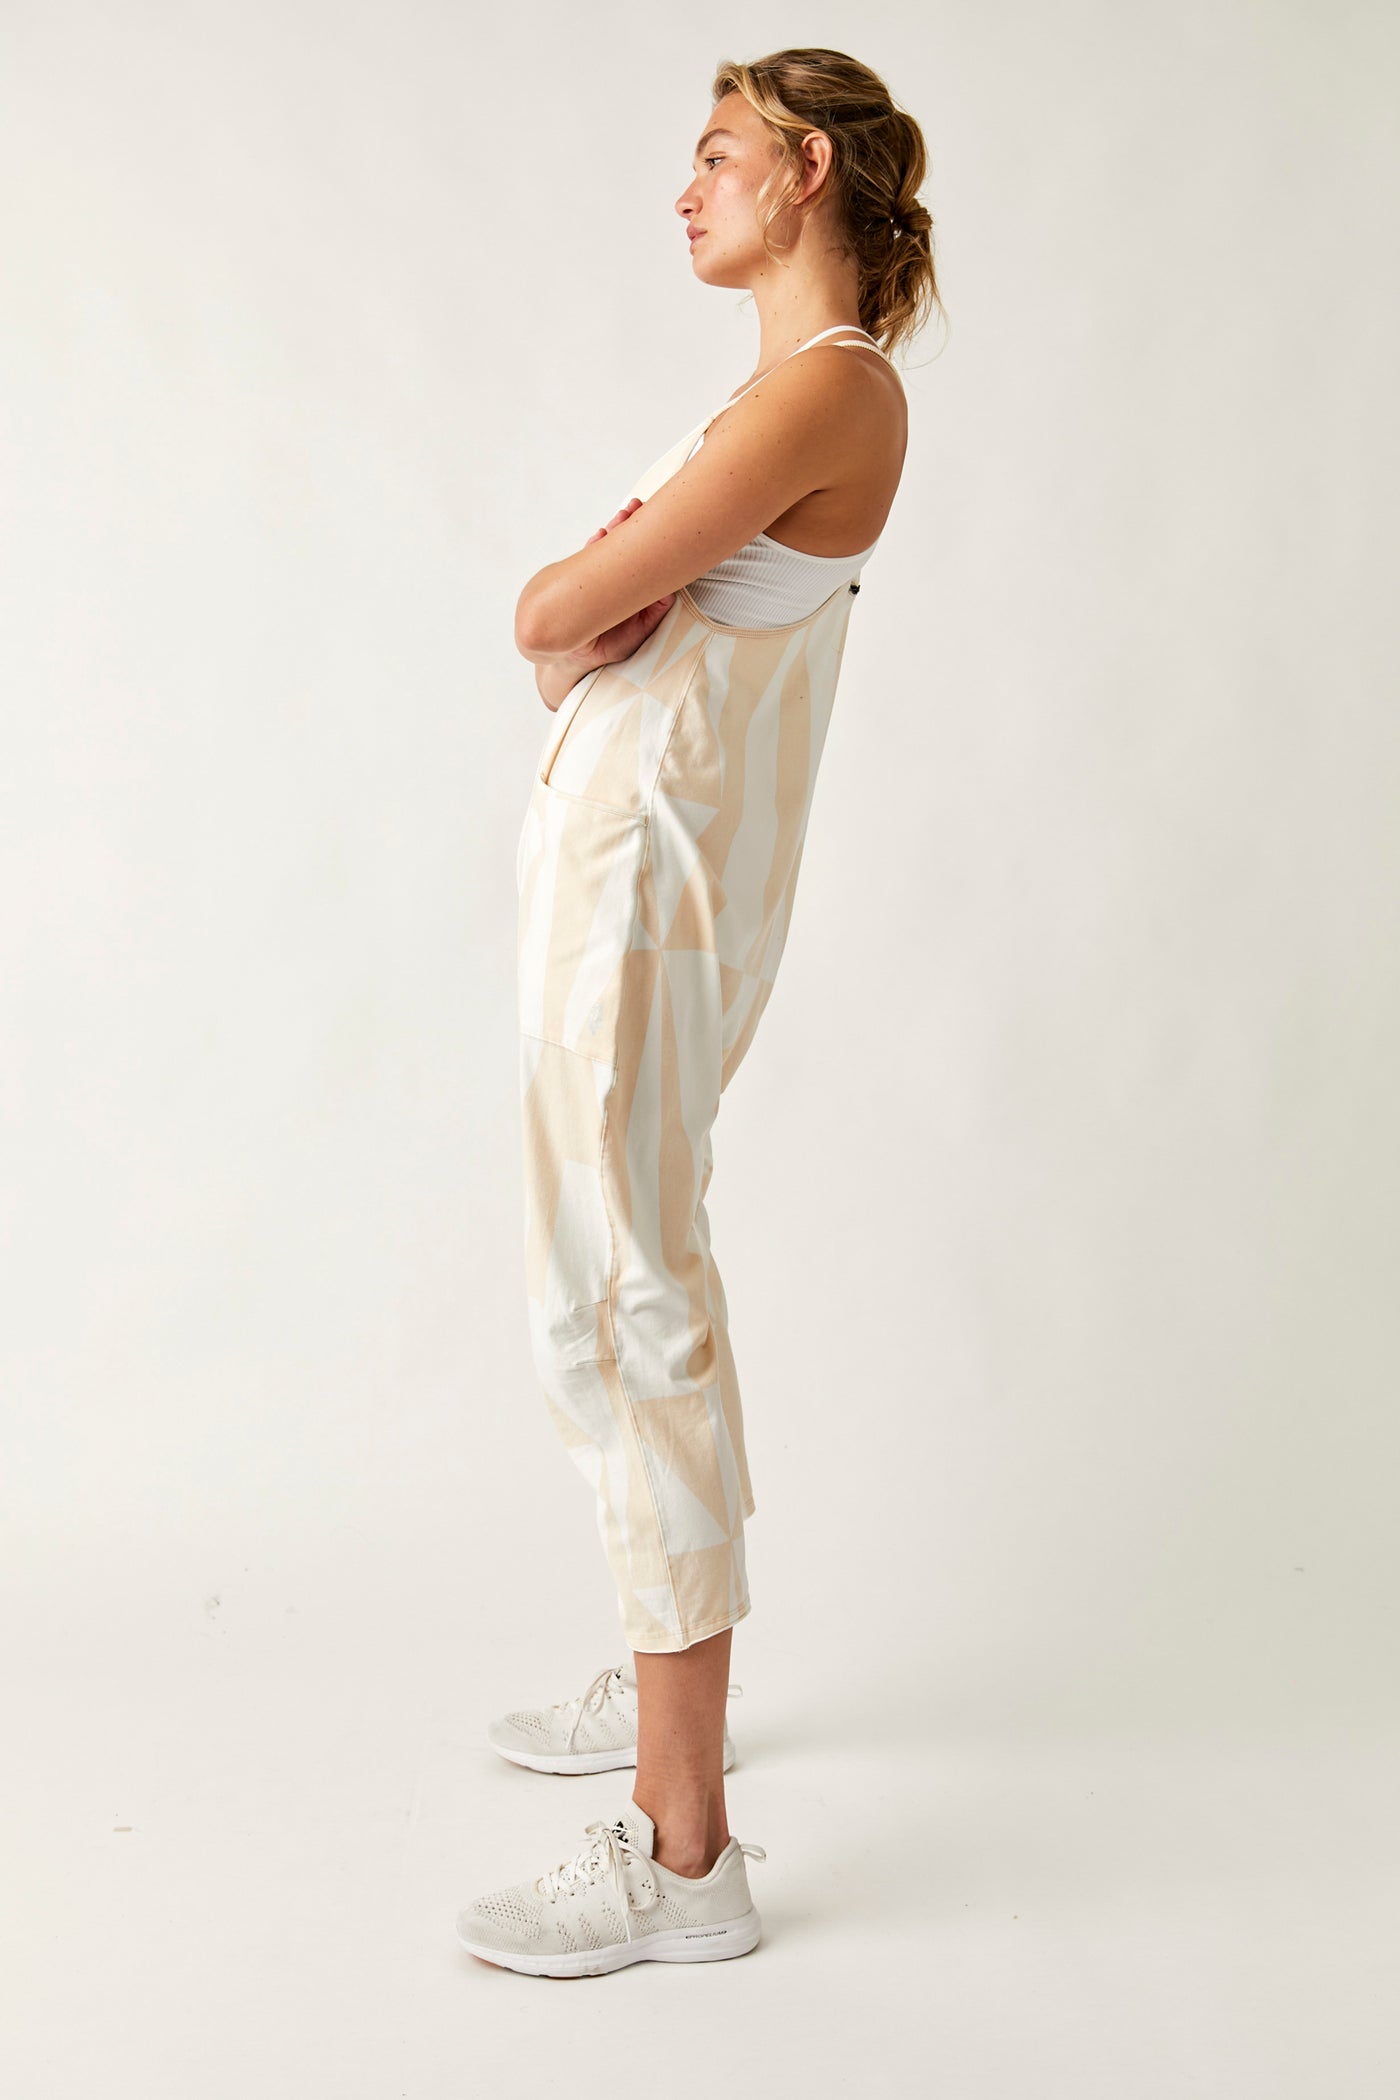 Free People Hot Shot Onesie - Incline Bamboo